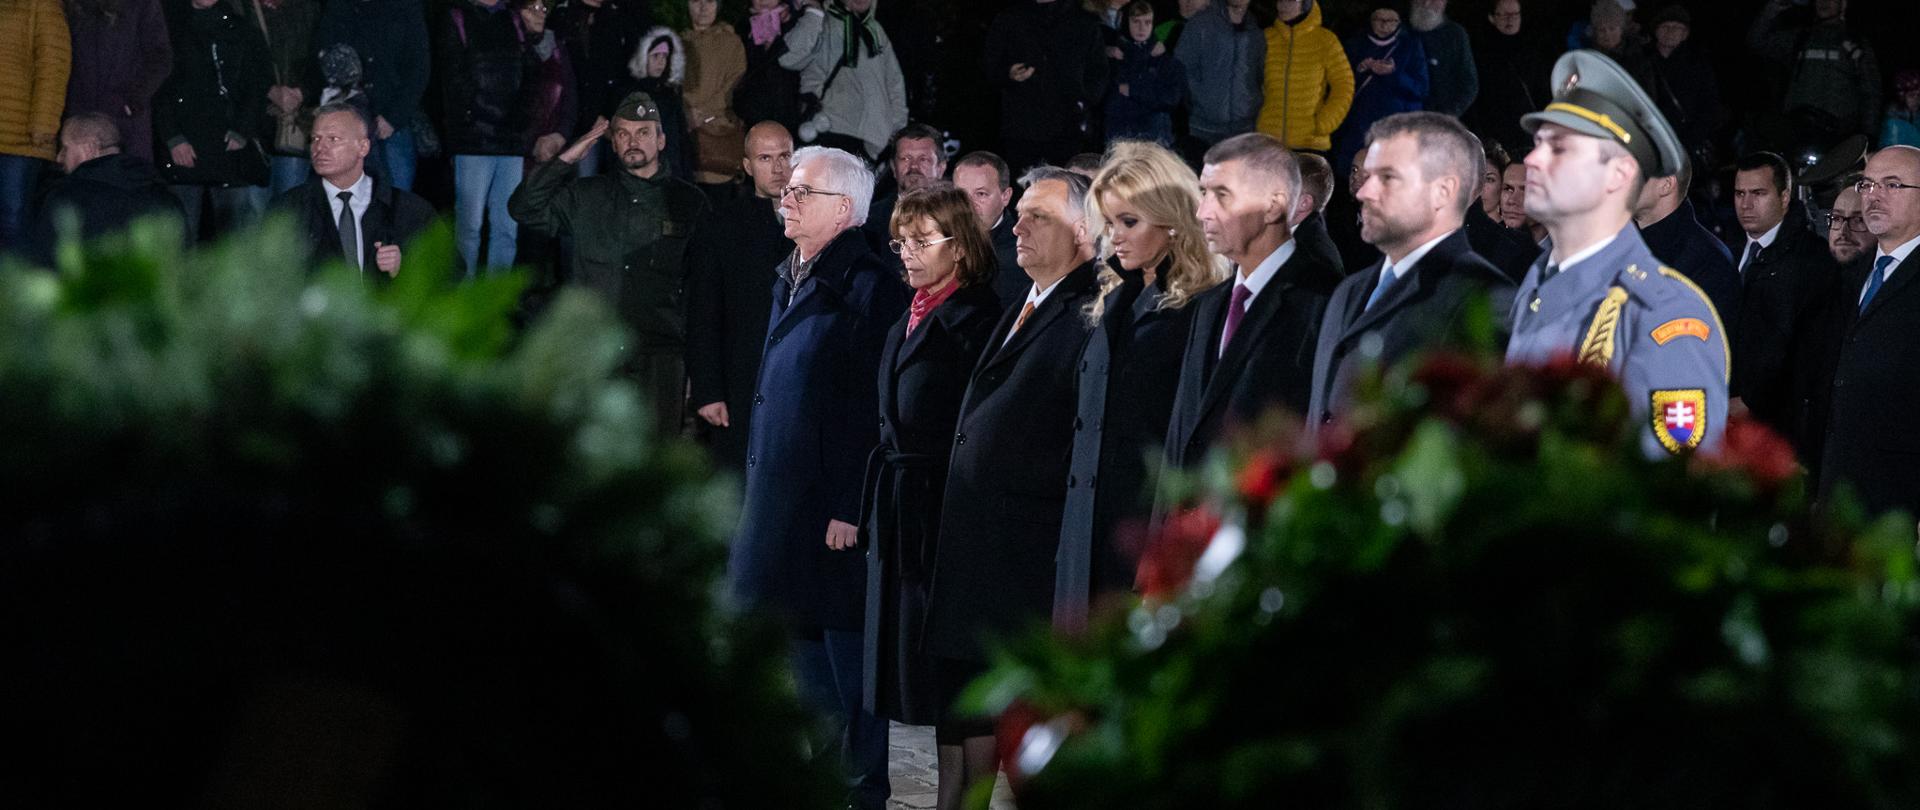 Minister Jacek Czaputowicz takes part in a ceremony to mark the anniversary of the Velvet Revolution 